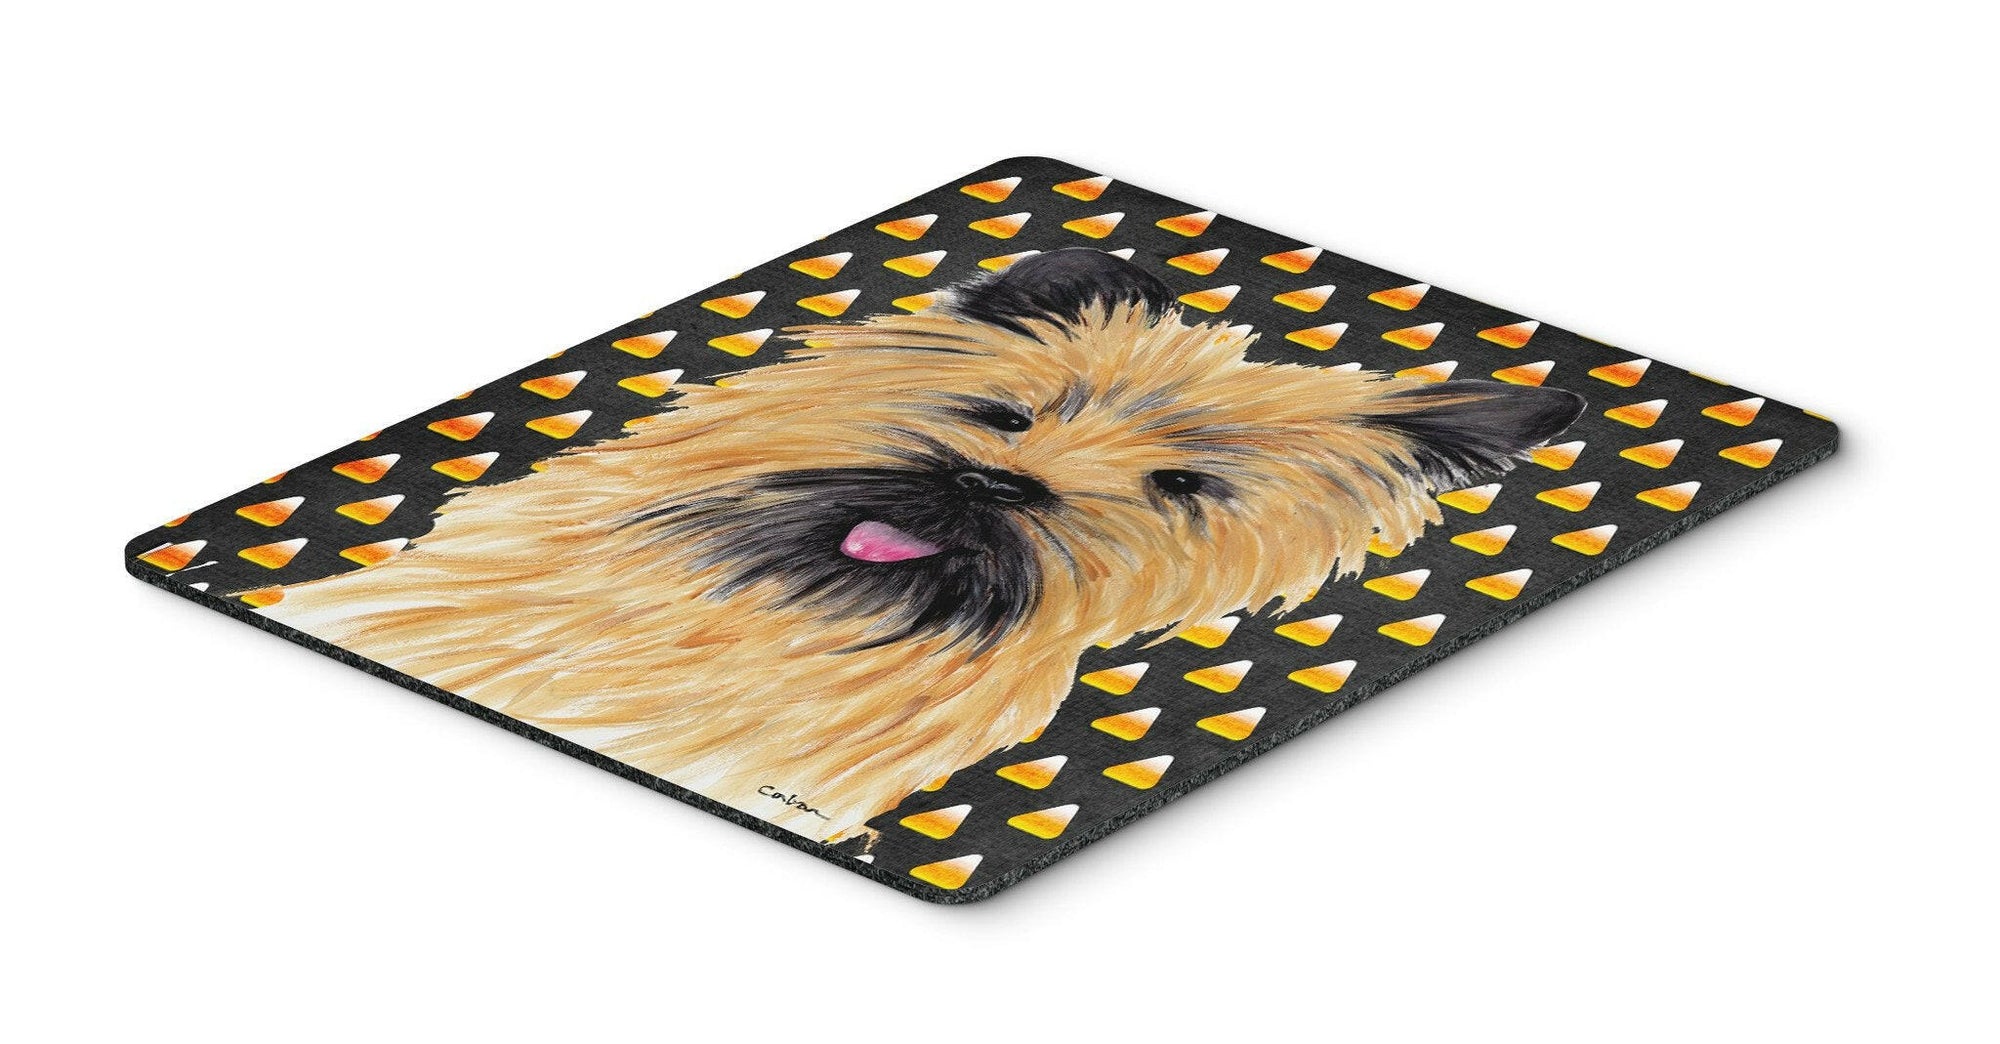 Cairn Terrier Candy Corn Halloween Portrait Mouse Pad, Hot Pad or Trivet by Caroline's Treasures